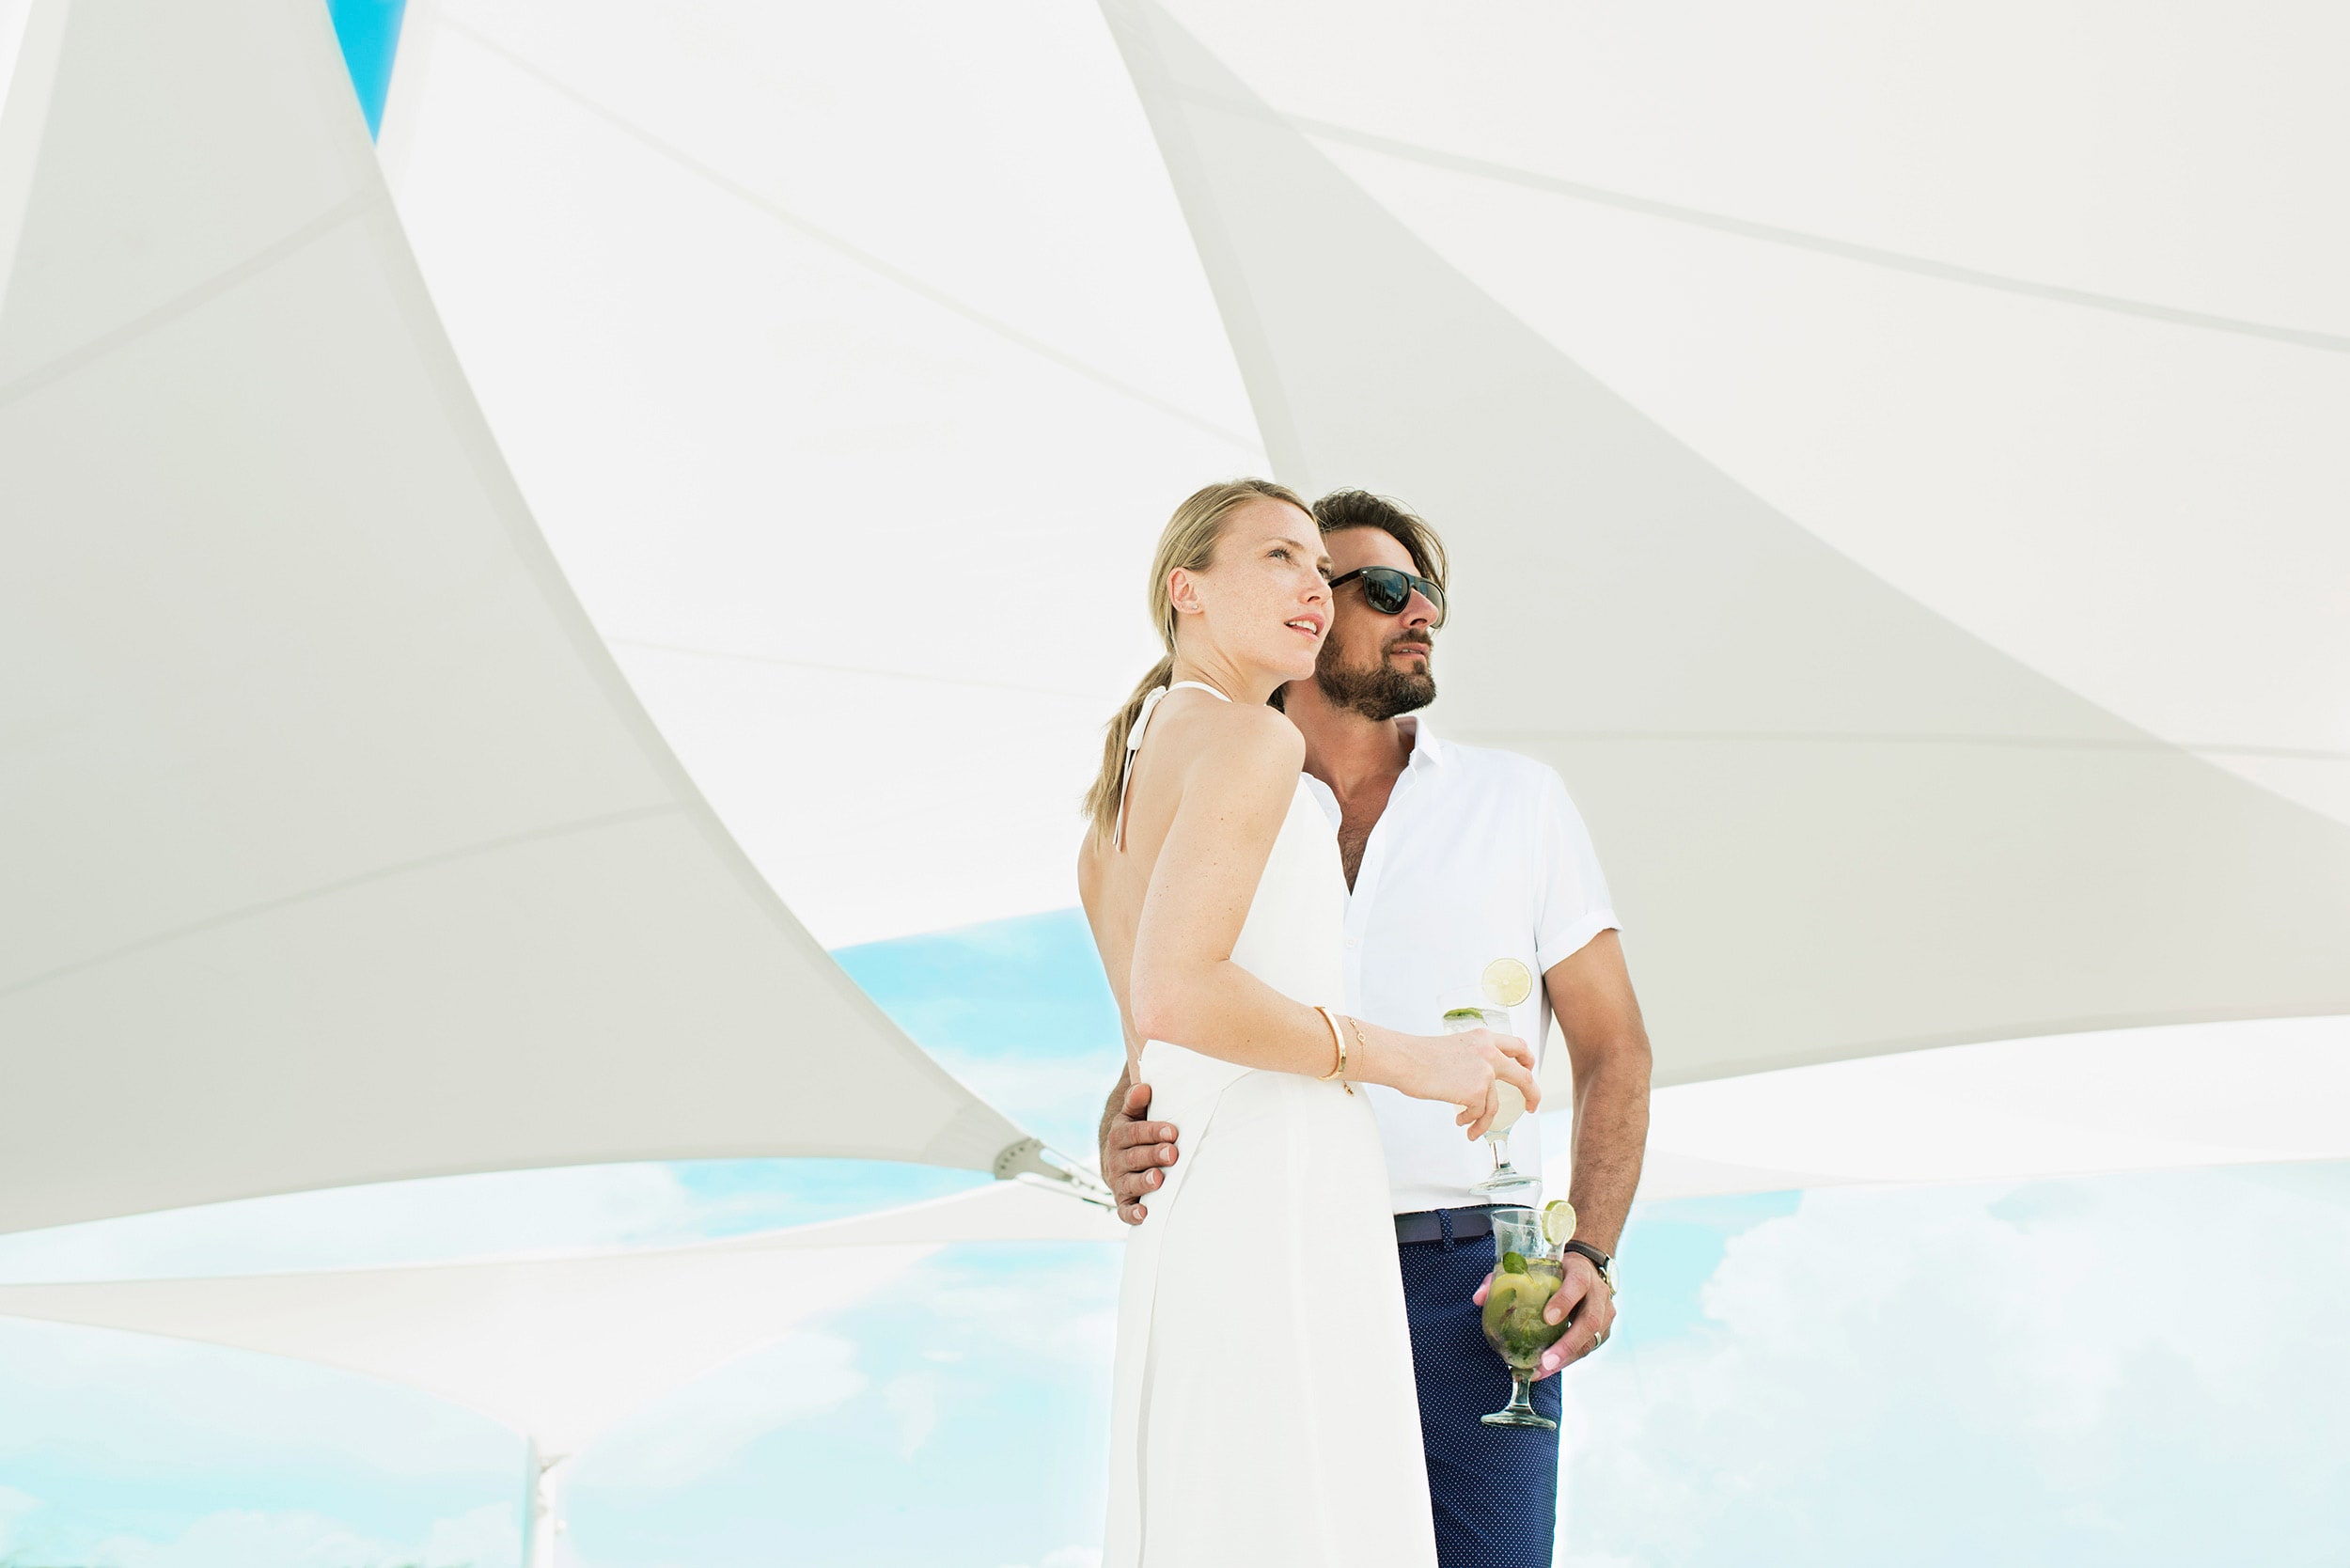 Finest Playa Mujeres the Best Resort to Renew Your Wedding Vows